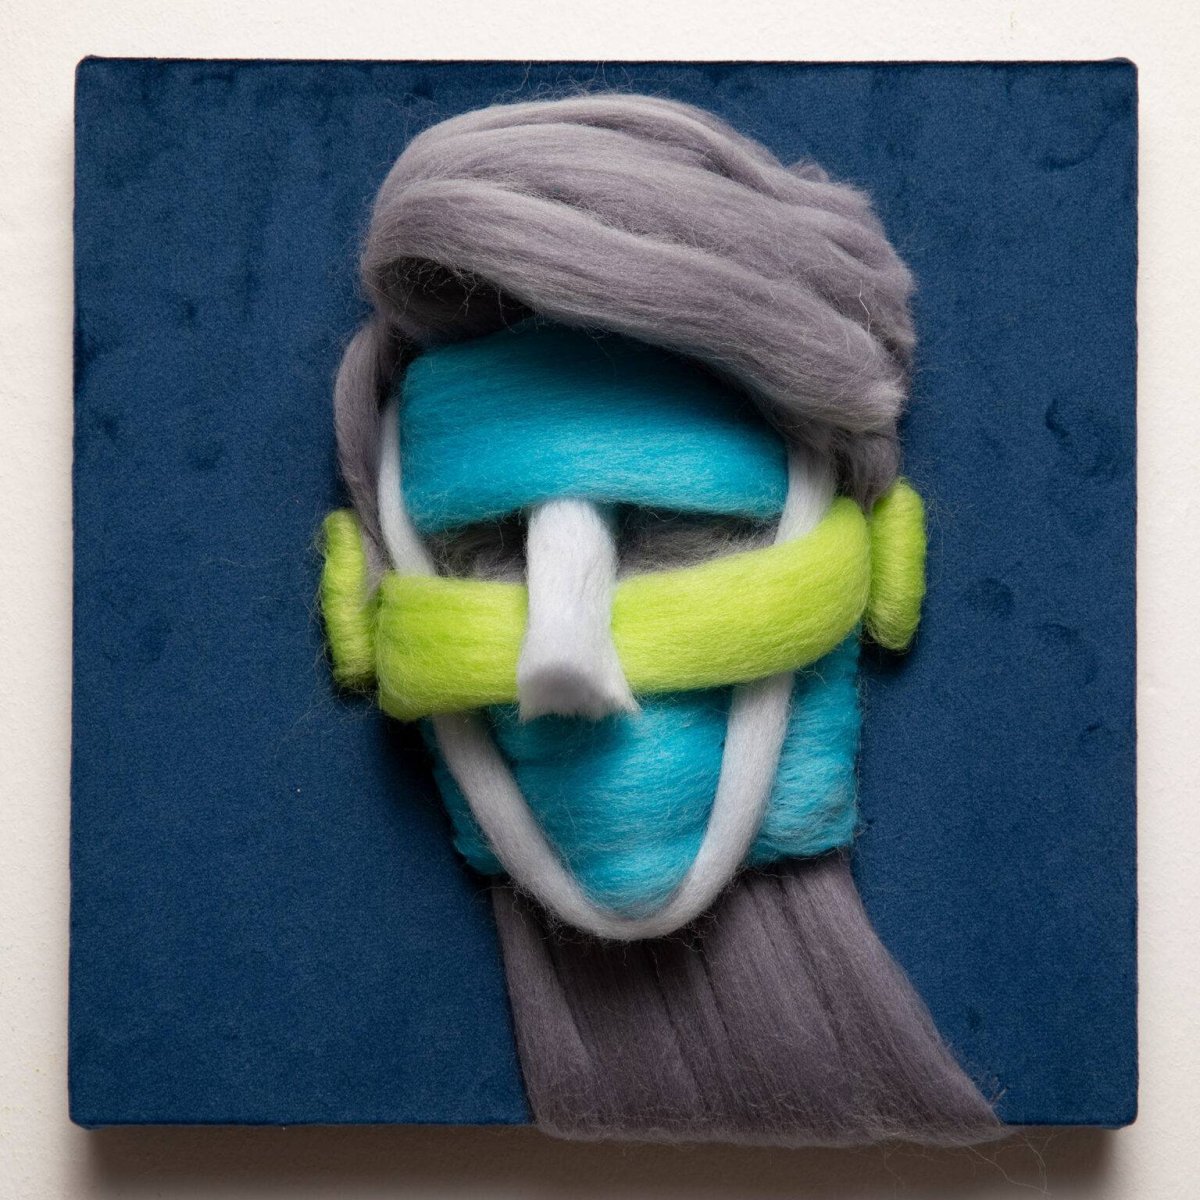 Expressive Sculptural Portraits Made Of Raw Wool By Salman Khoshroo 13